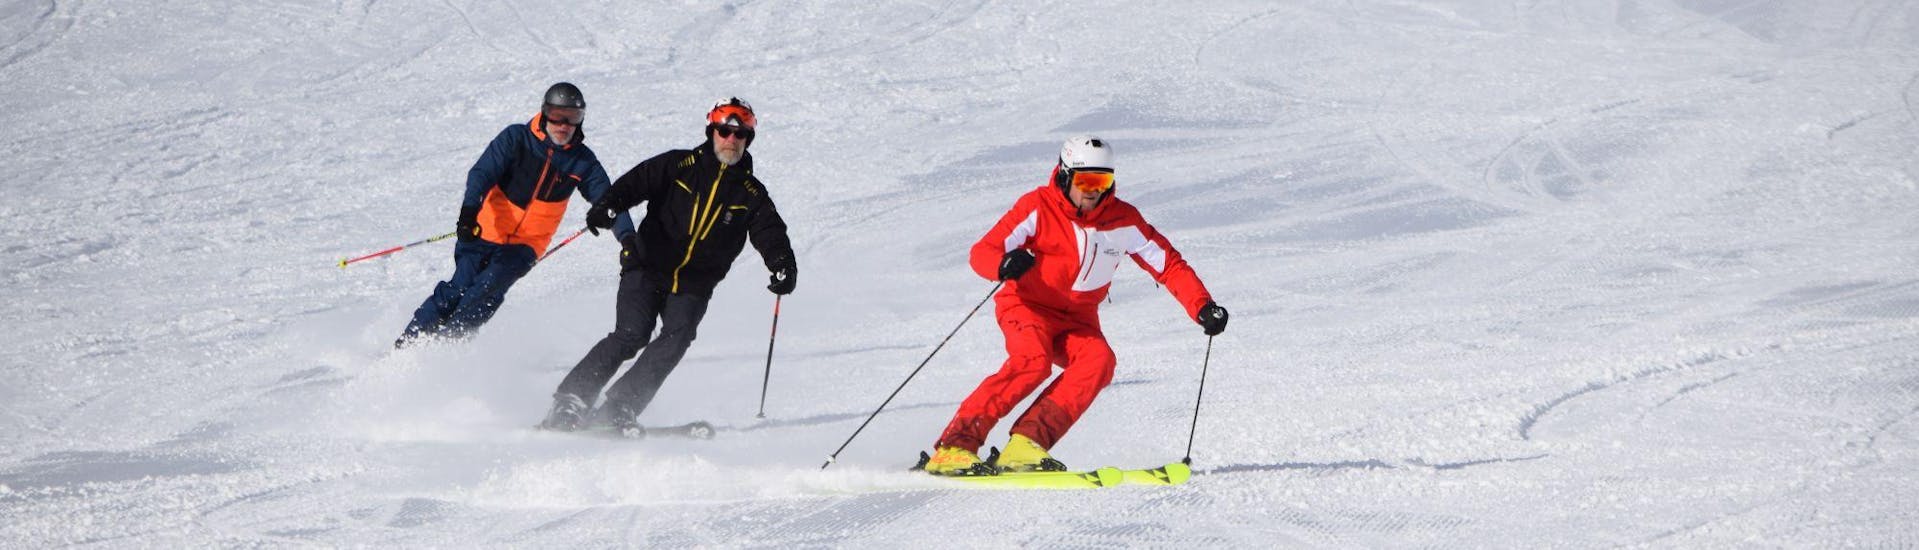 A ski instructor with two students going down the slope during private ski lessons for adults of all levels with ski school Westendorf.